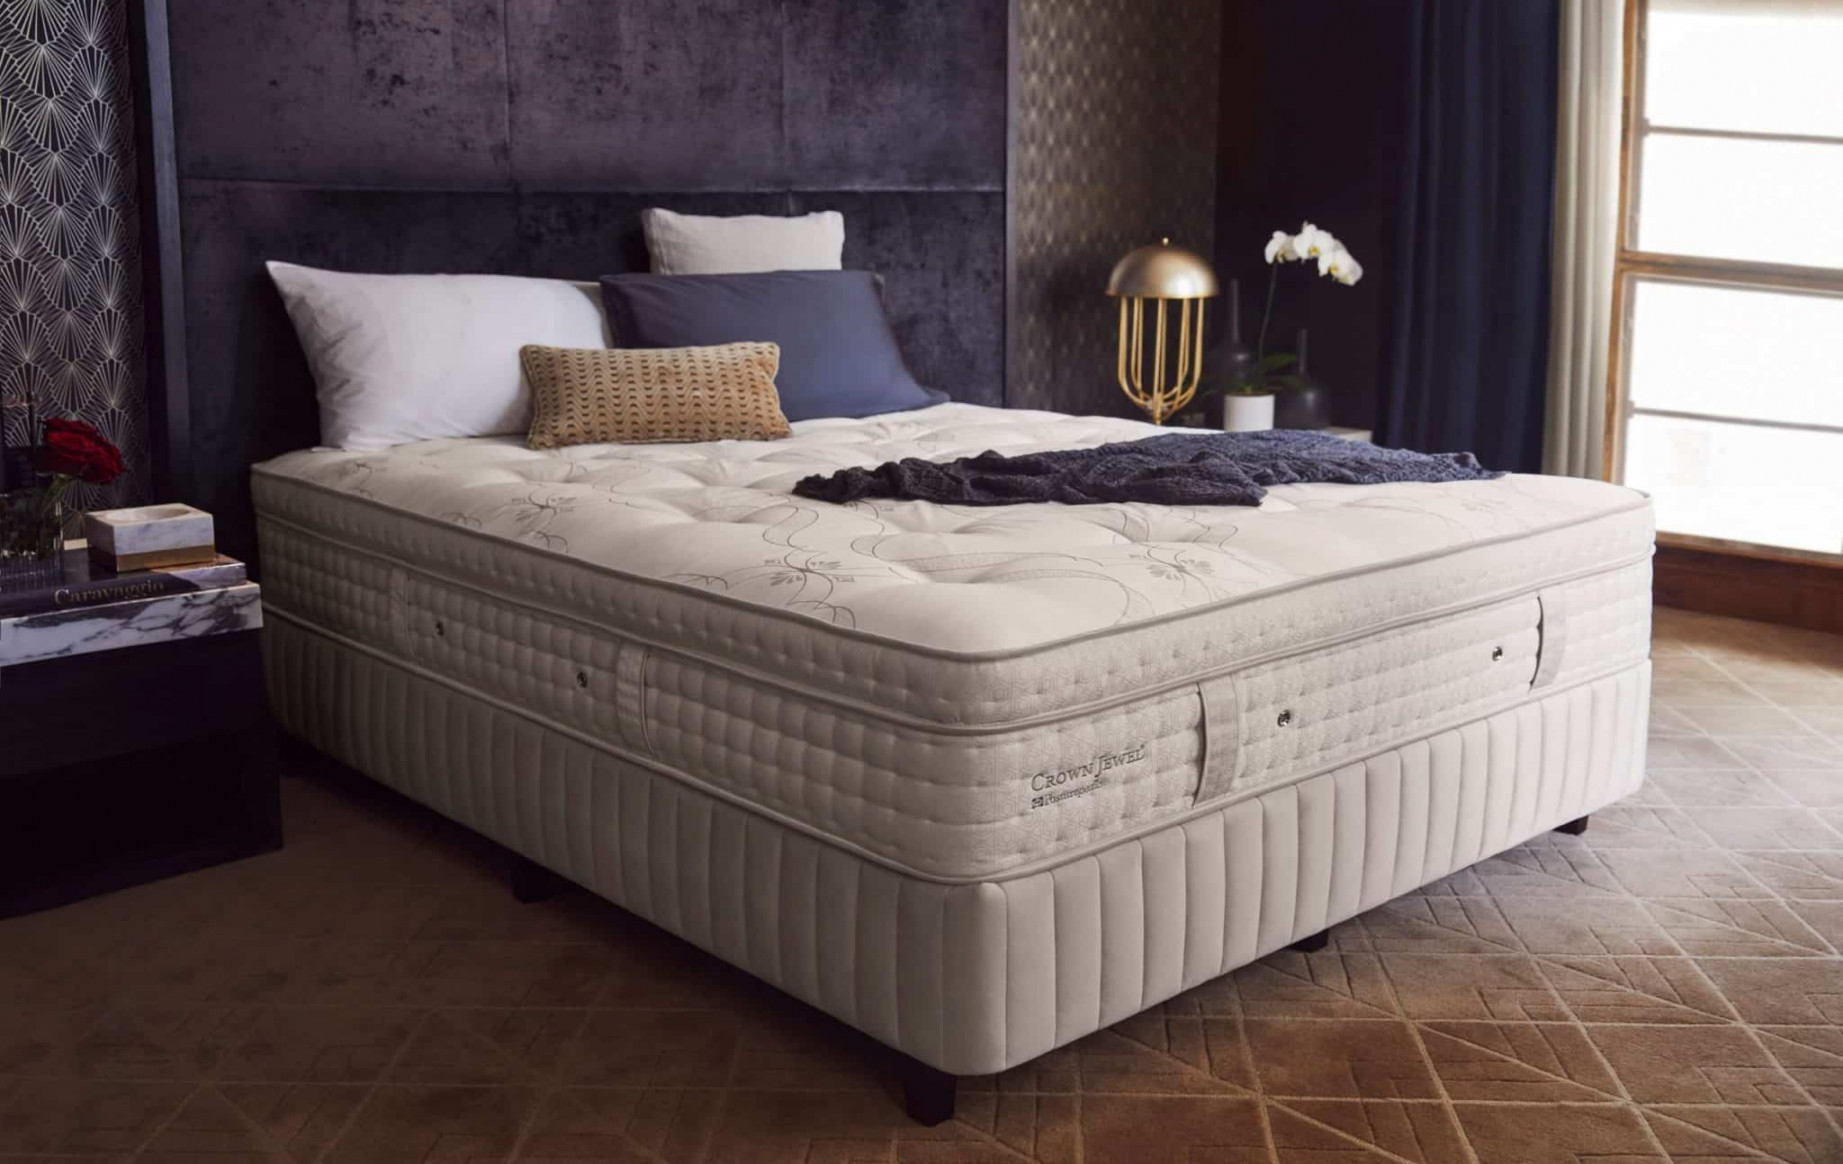 King Bed With Mattress